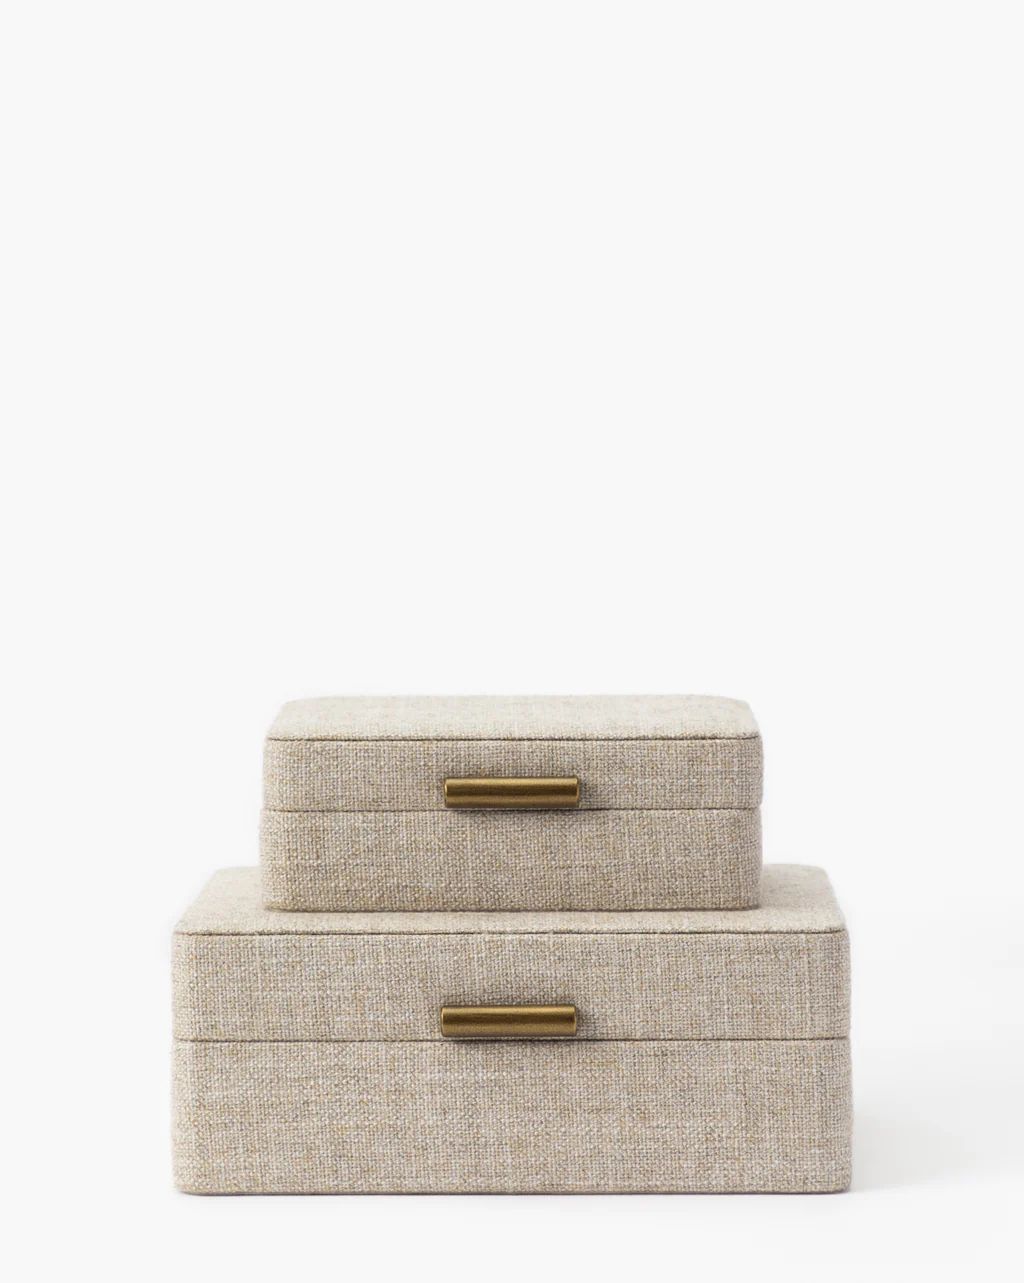 Natural Fabric Boxes | McGee & Co.